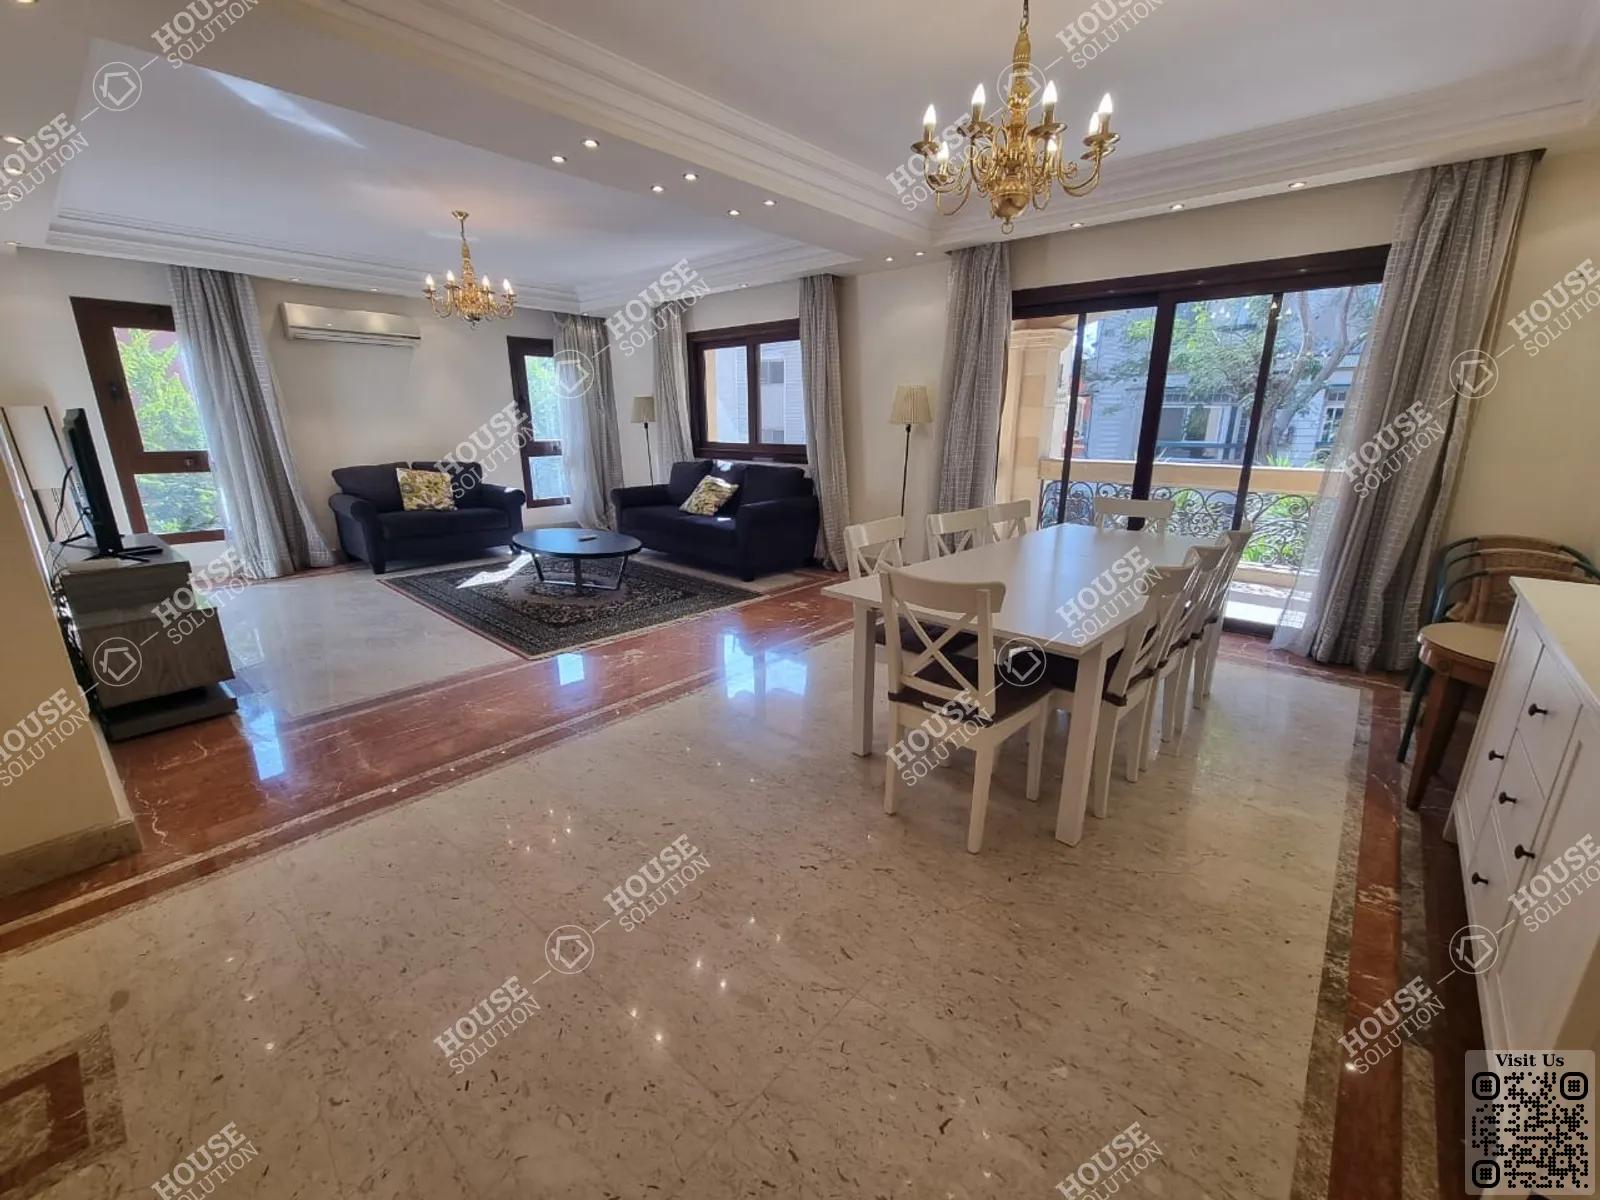 RECEPTION  @ Apartments For Rent In Maadi Maadi Sarayat Area: 220 m² consists of 4 Bedrooms 4 Bathrooms Modern furnished 5 stars #5626-1